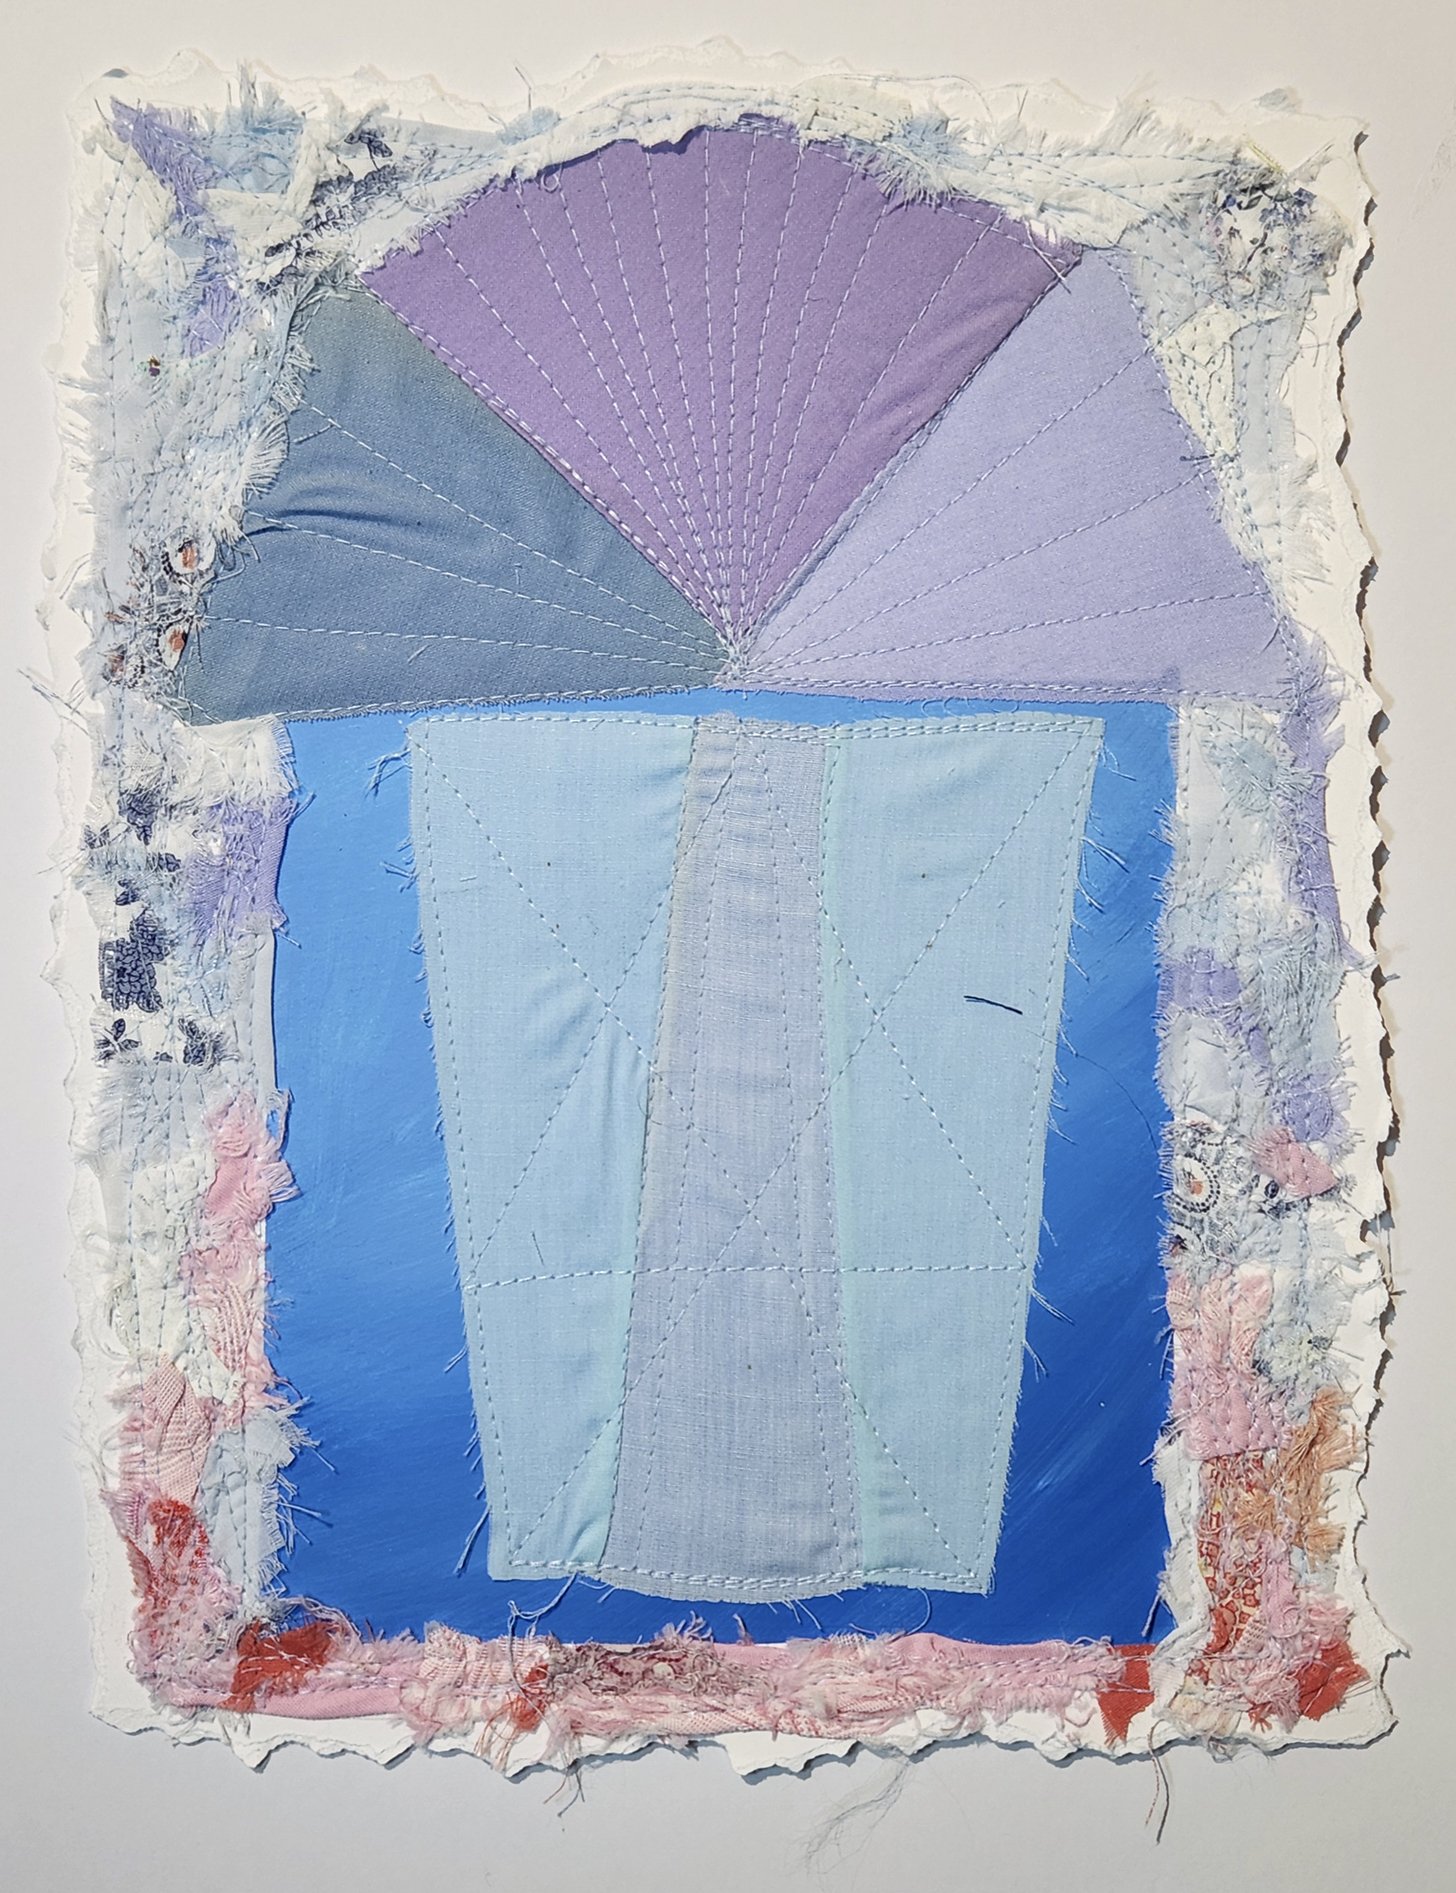   Bryan McGinnis ,  Blue / Pink Gradient , 2021, acrylic paint, blended fabric and mom's patterns, 9 1/2 x 12 1/2” 